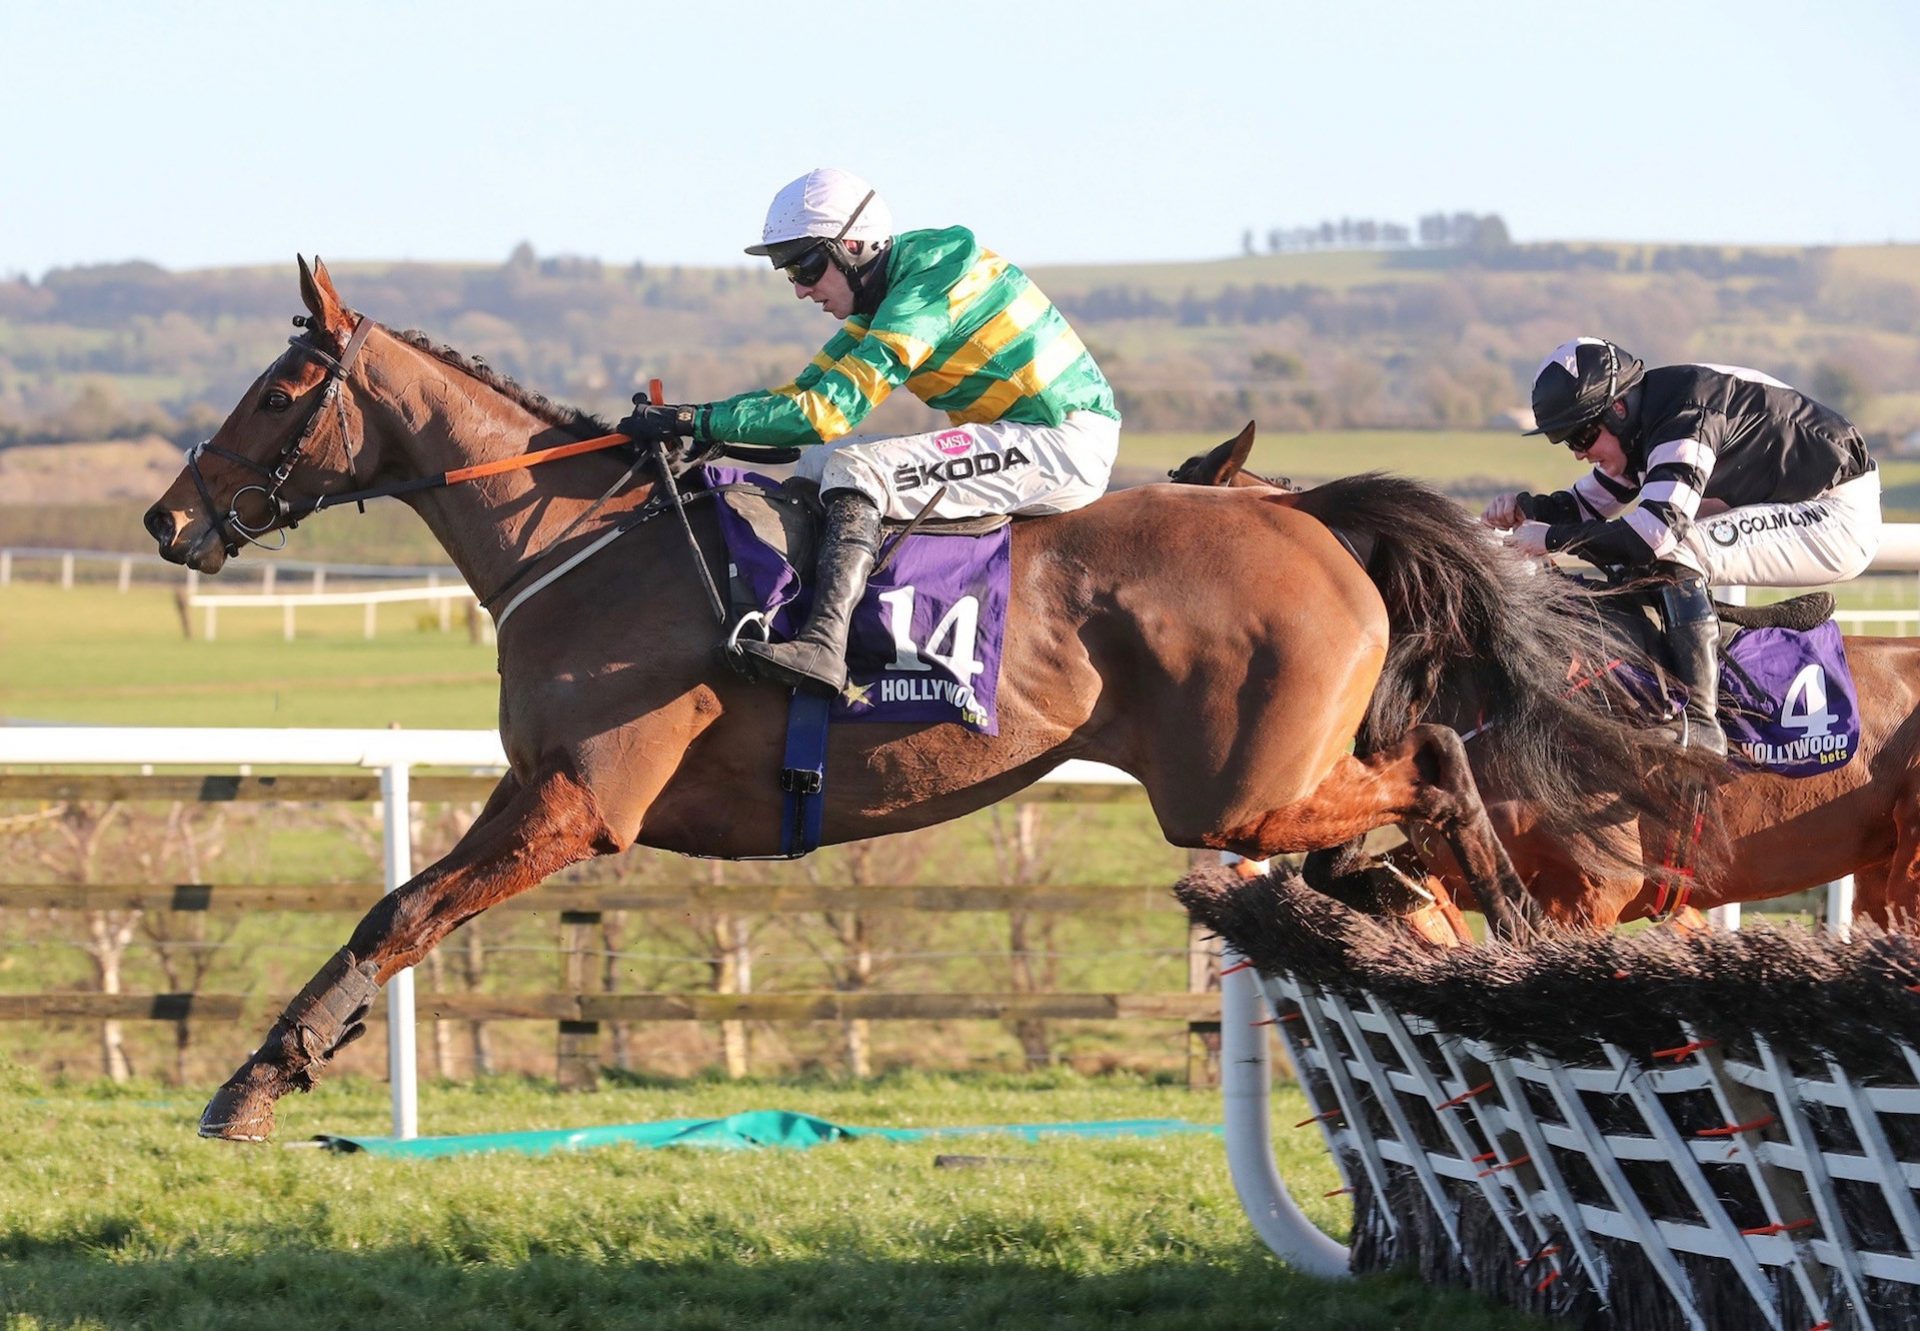 Limerick Lace (Walk In The Park) Wins The Mares Maiden Hurdle At Punchestown